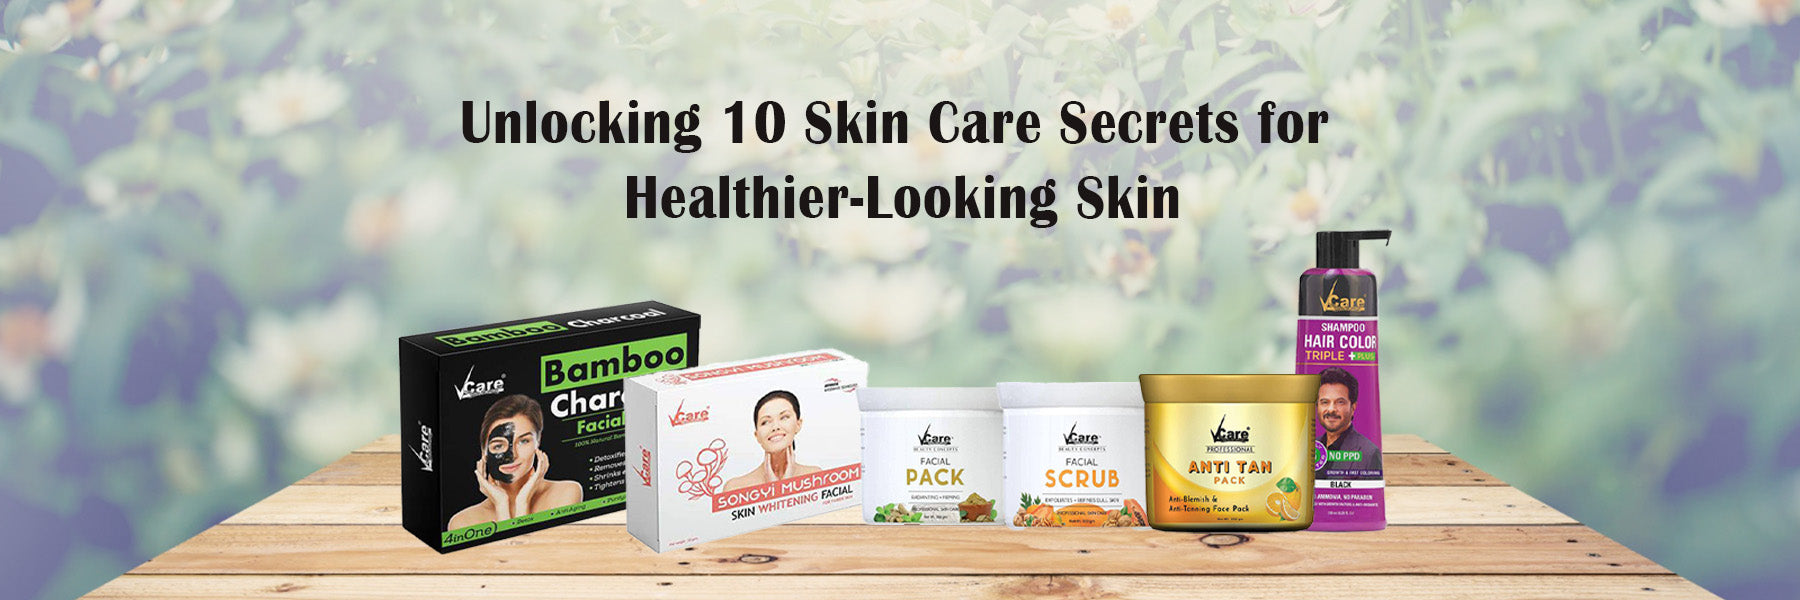 Unlocking 10 Skin Care Secrets for Healthier-Looking Skin FromIndia.com